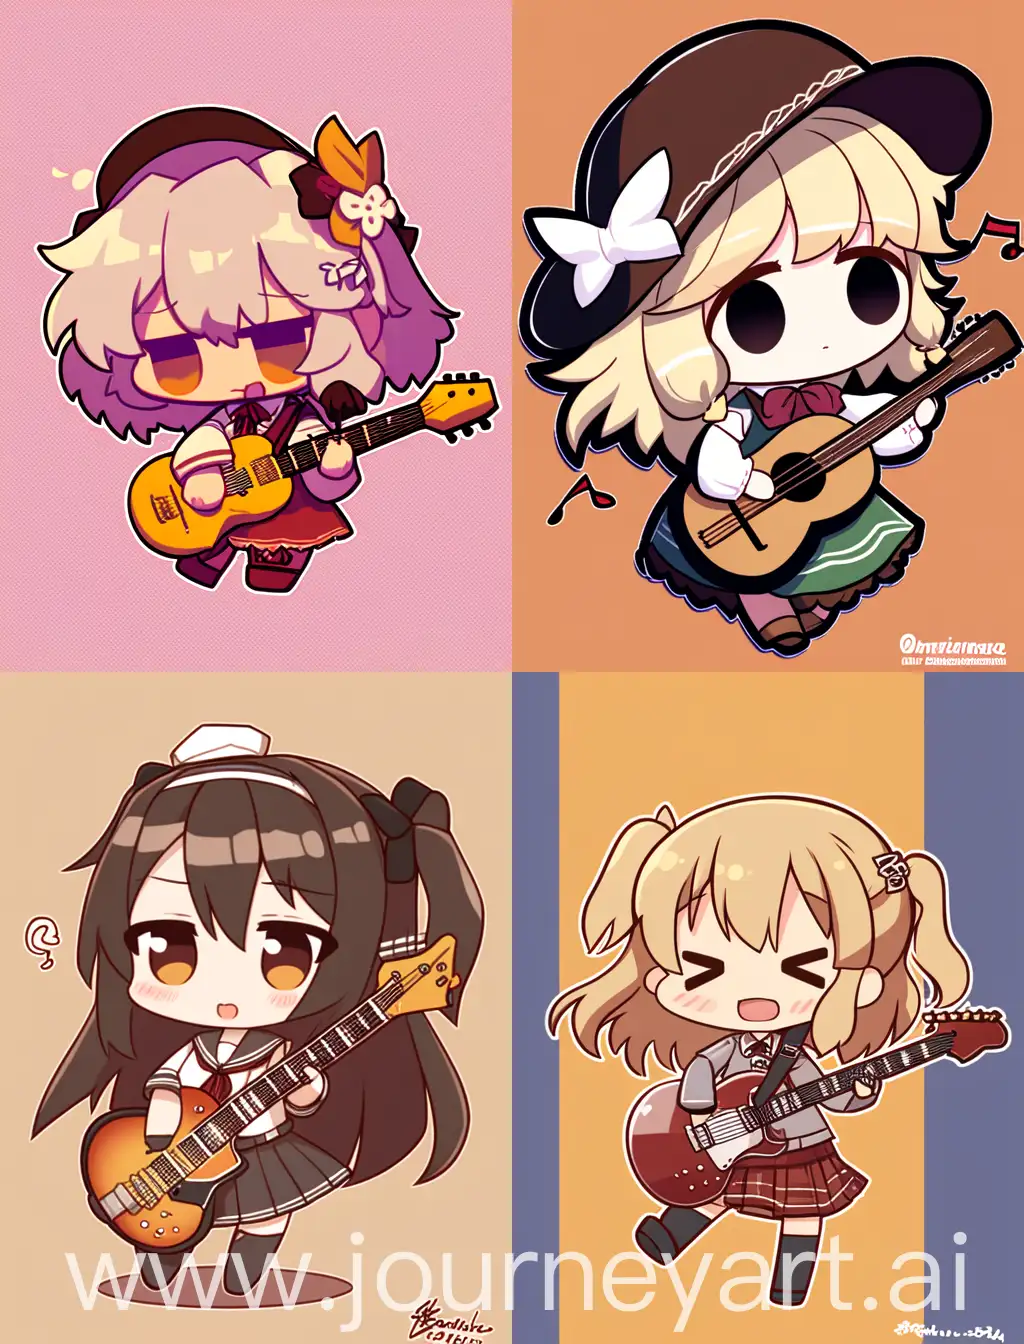 Chibi-Anime-Girl-Playing-Guitar-Cute-Cartoon-Character-with-Brown-Background